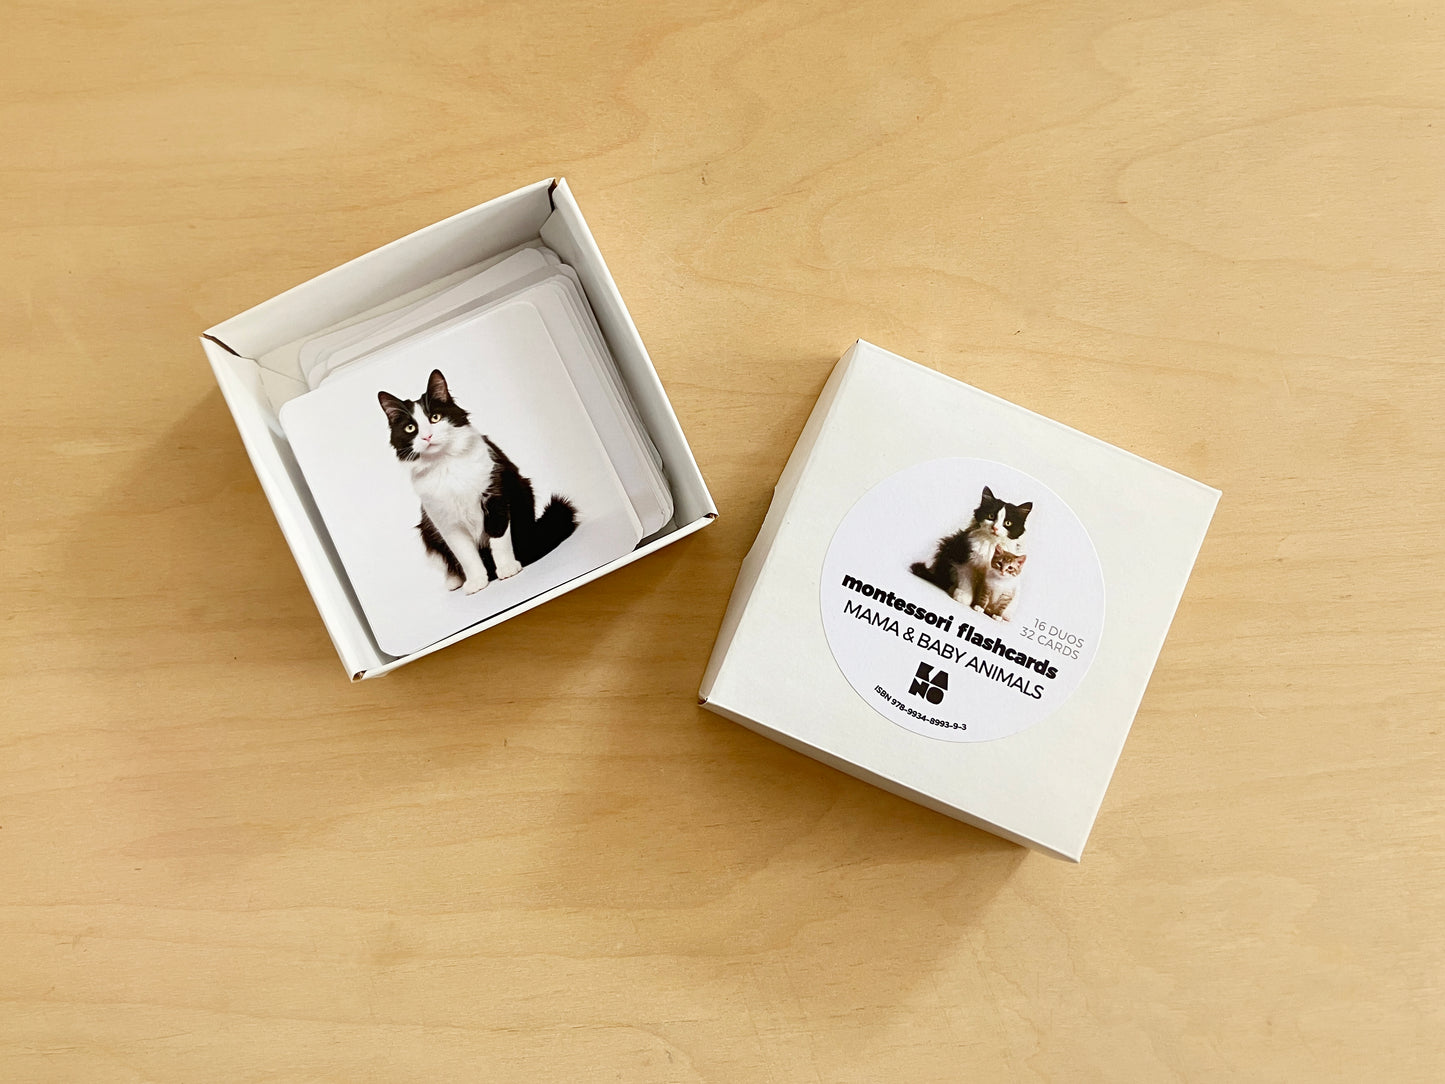 Montessori mama and baby animals pairs, in a box with mother cat